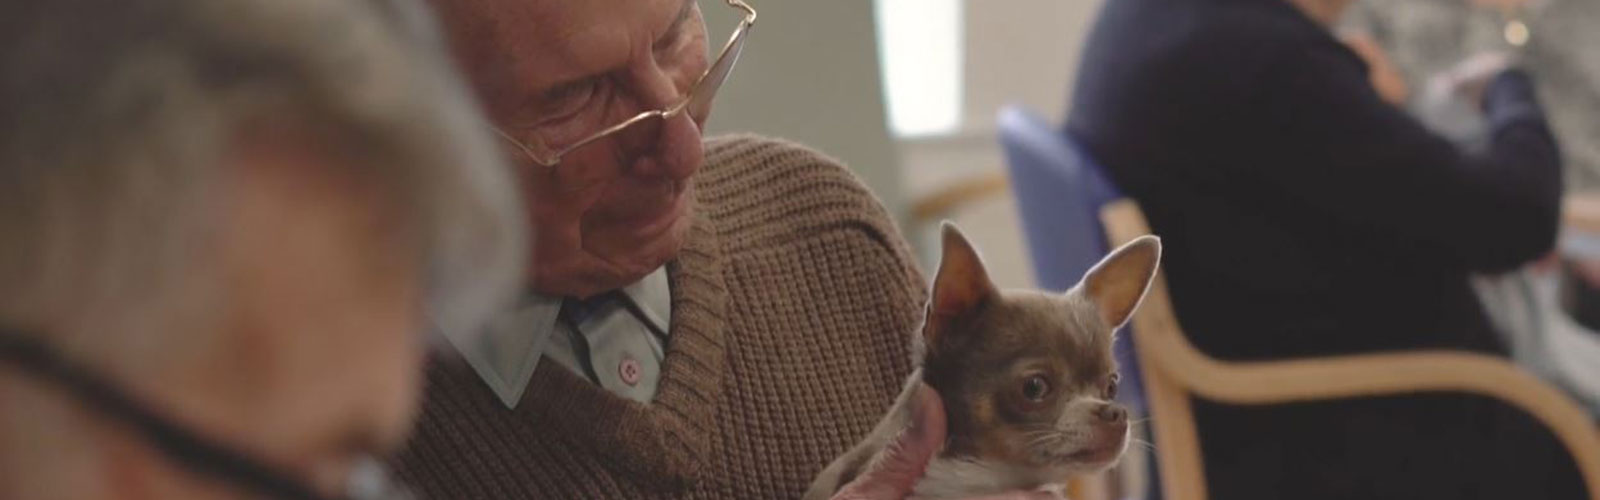 An older man with glasses holding a small dog